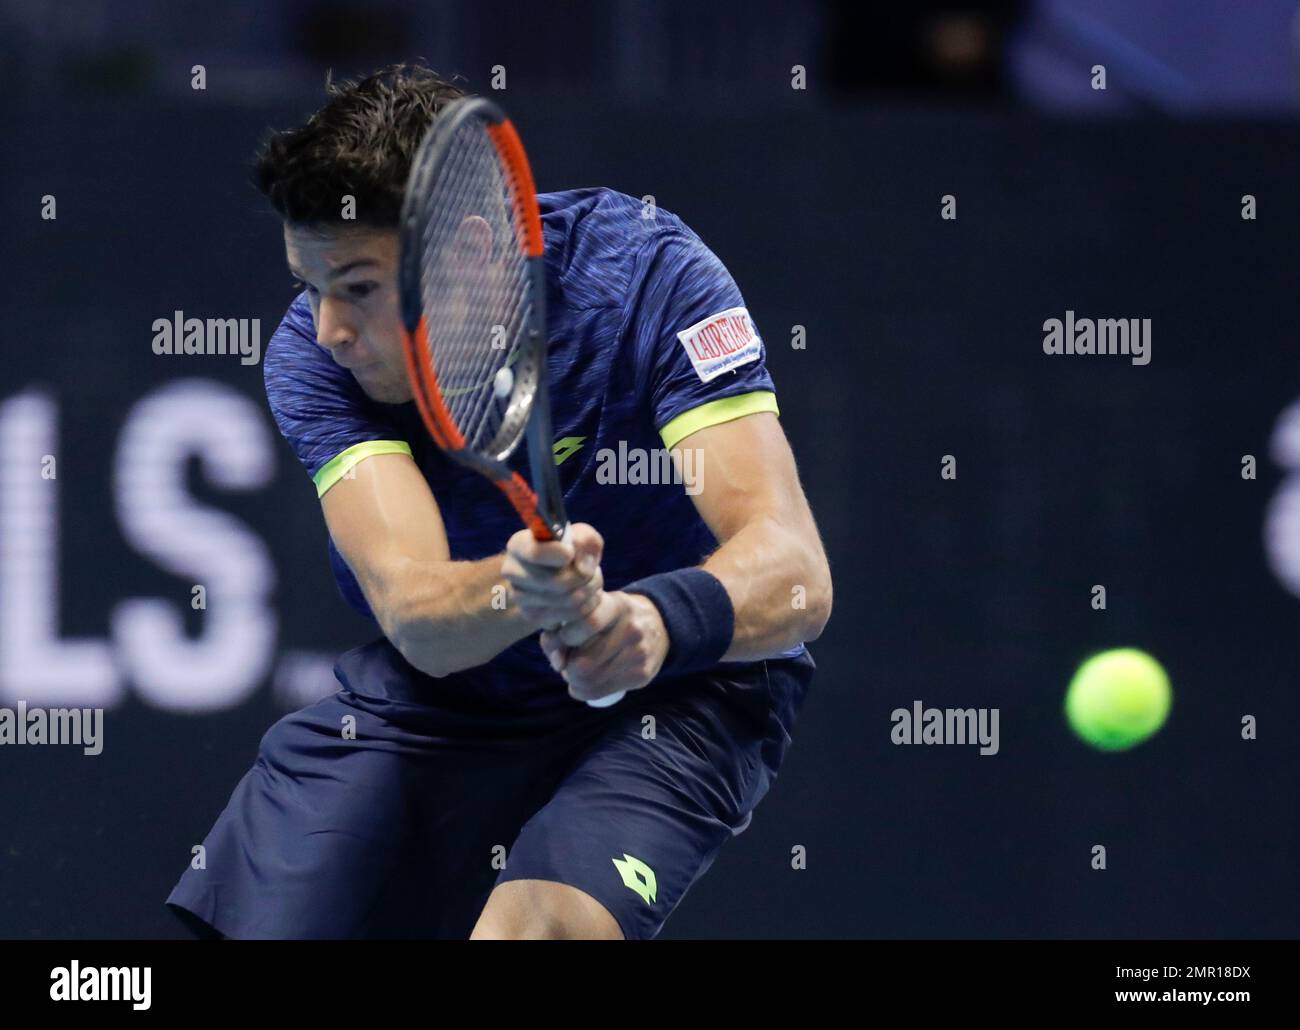 Gianluigi Quinzi of Italy returns the ball to Andrey Rublev of Russia  during the ATP Next Gen tennis tournament finals, at the Rho fair, near  Milan, Italy, Tuesday, Nov. 7, 2017. (AP